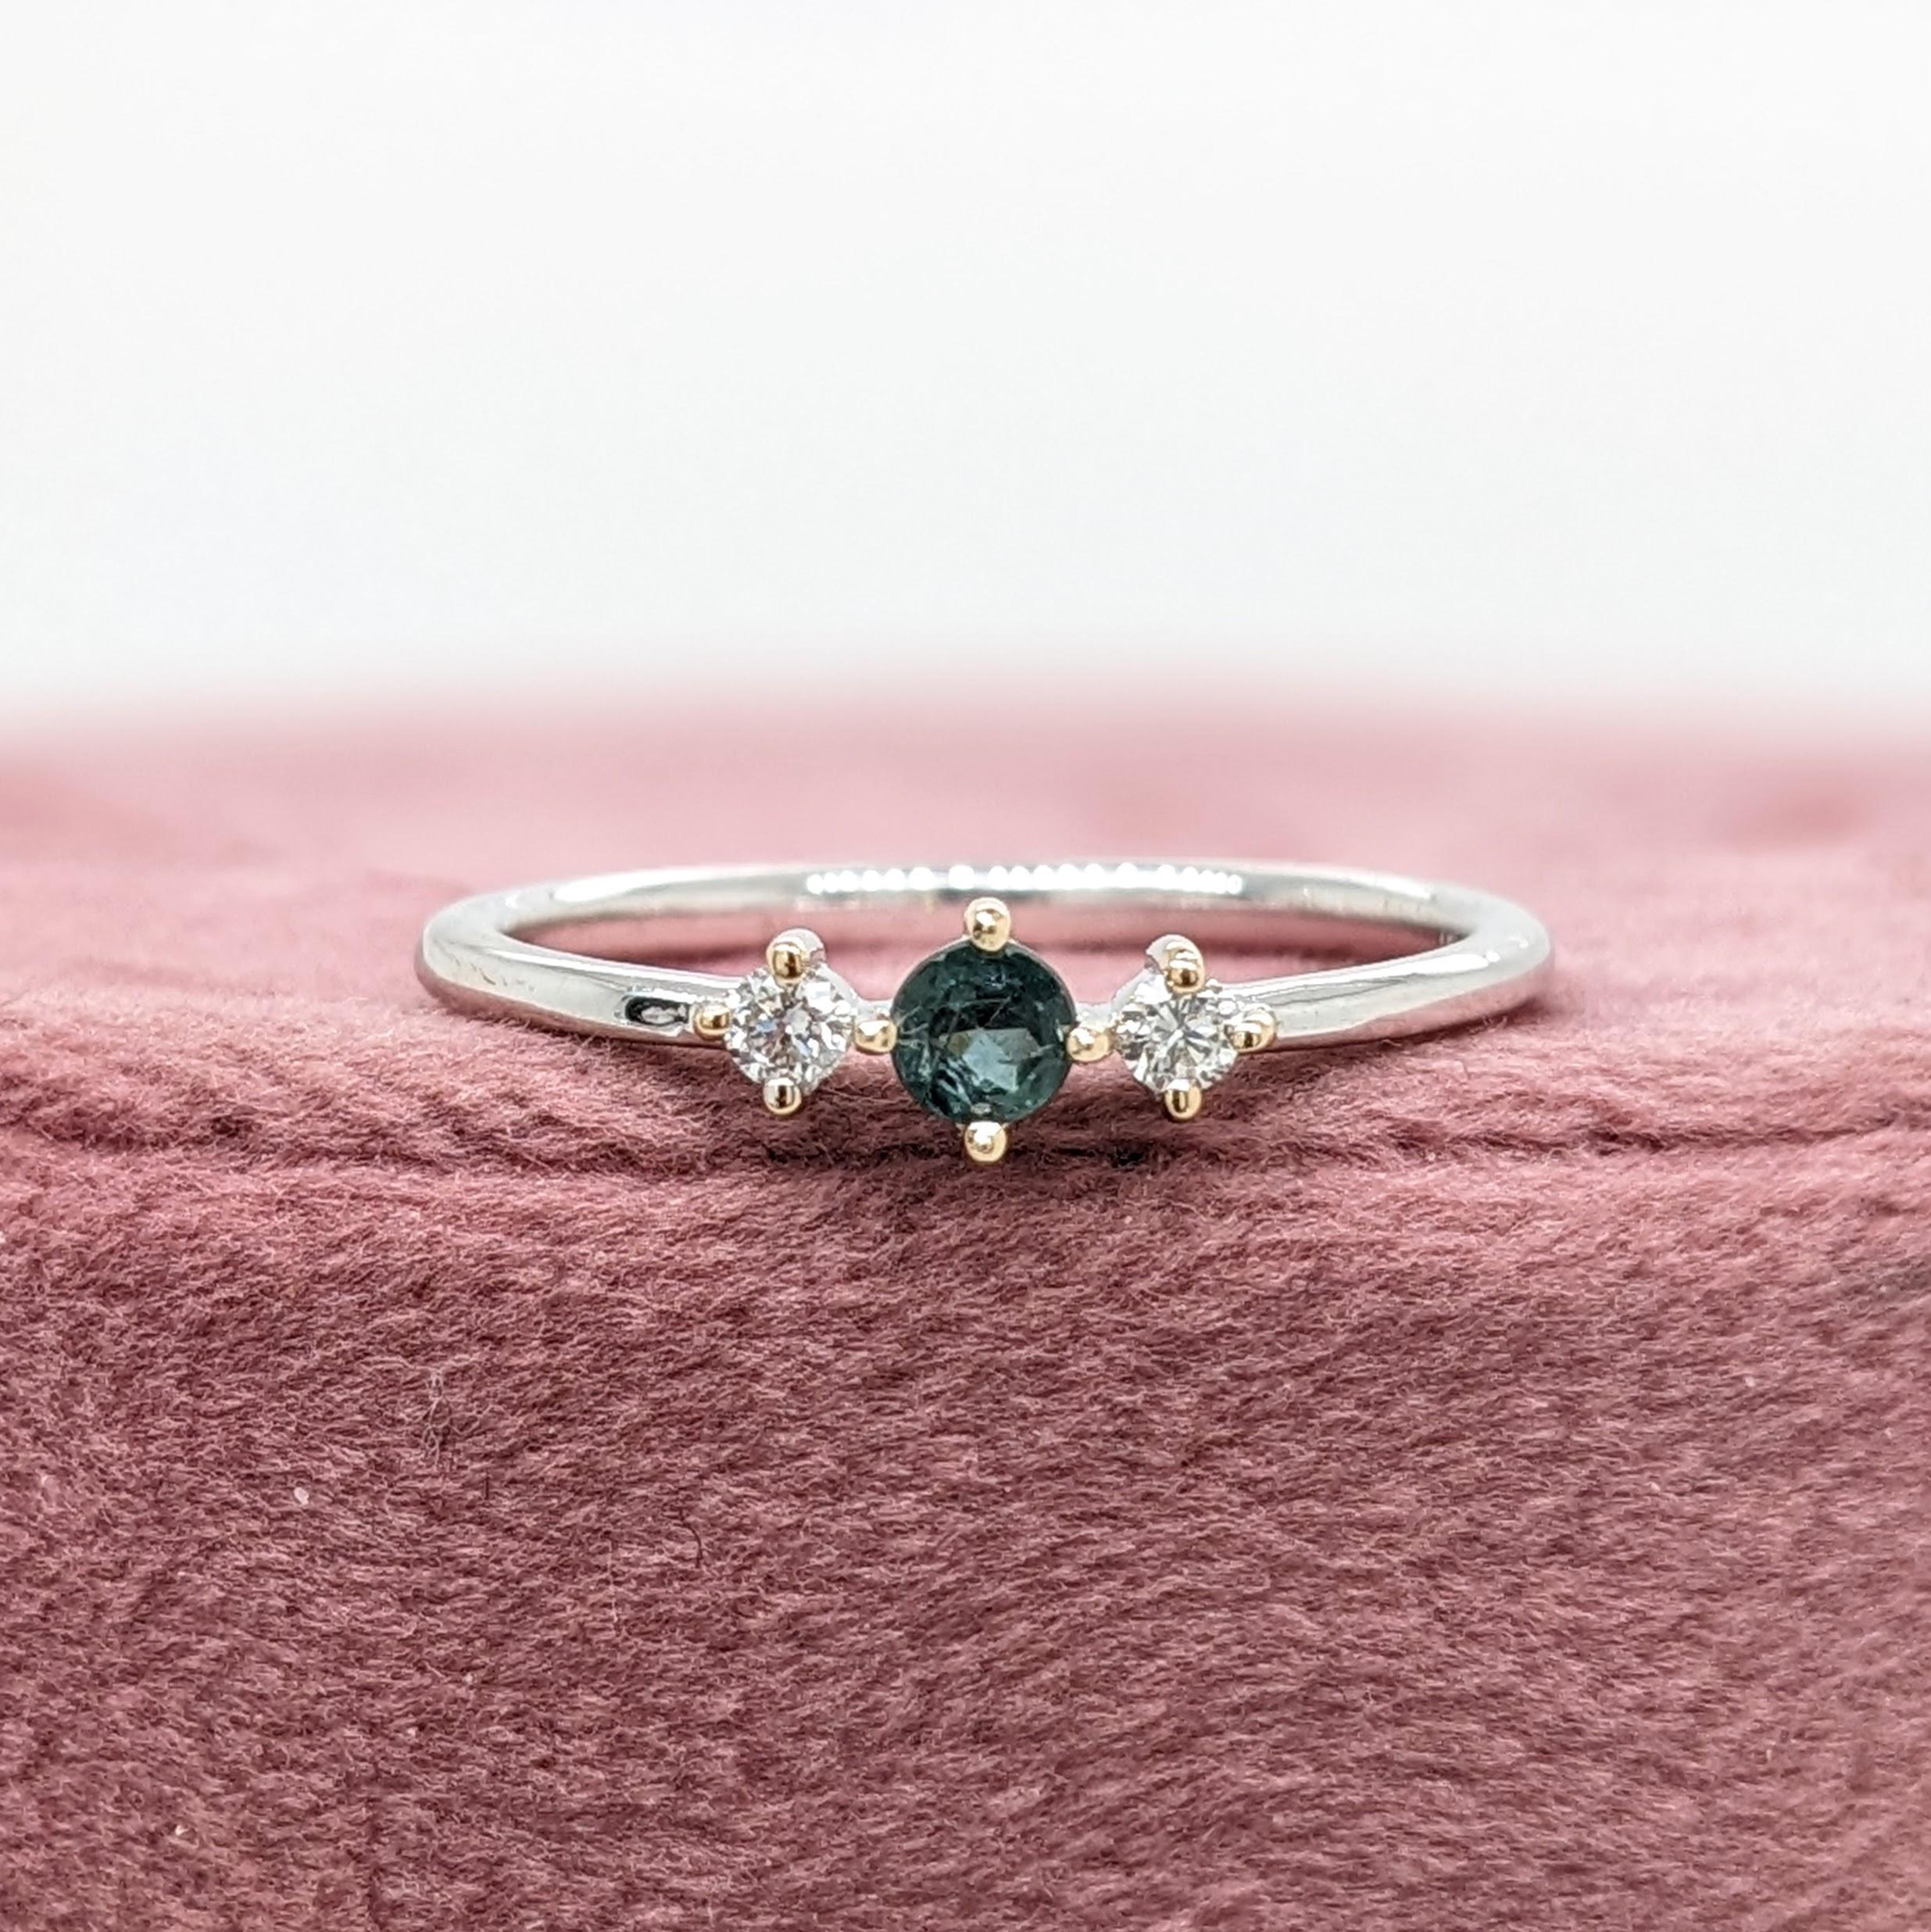 This beautiful ring features an alexandrite in 14k white Gold and two diamond accents. A dainty ring design perfect for an eye catching engagement or anniversary. This ring also makes a beautiful birthstone ring for your loved ones.

The occasions